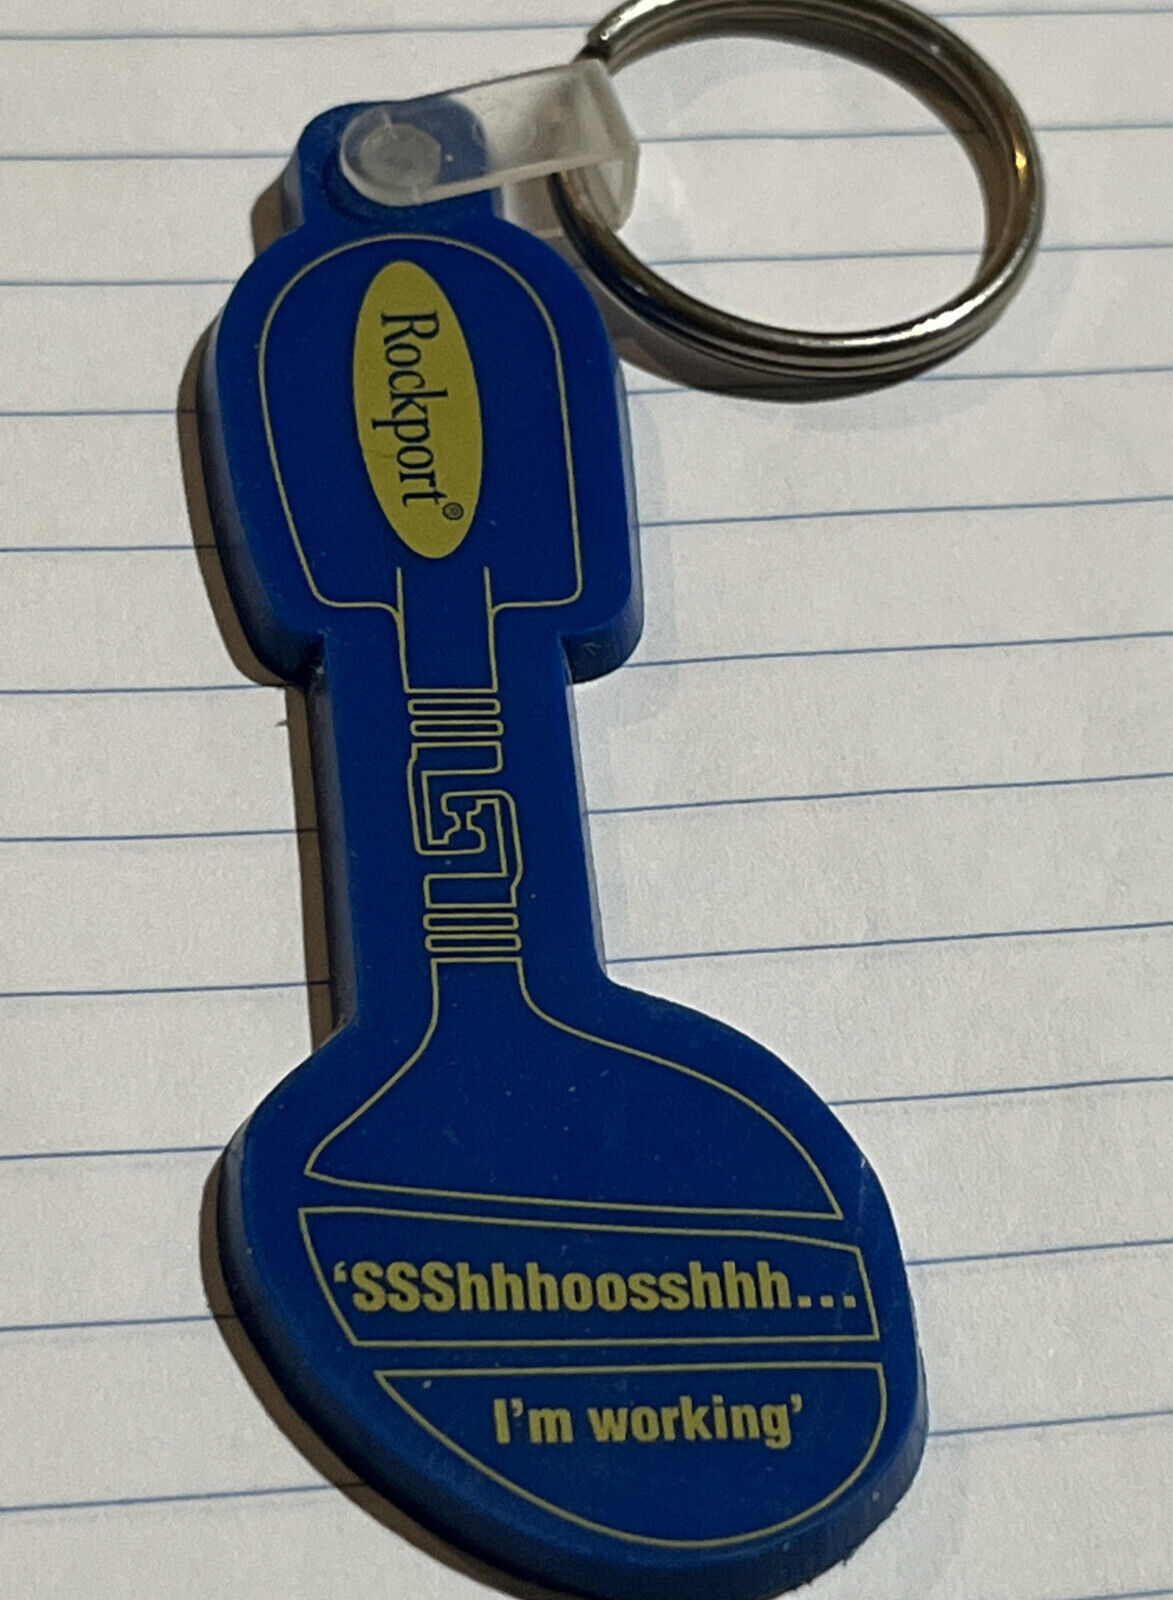 Rockport Shoes DMX Keychain Key Ring Blue With Yellow Writing Collectible New